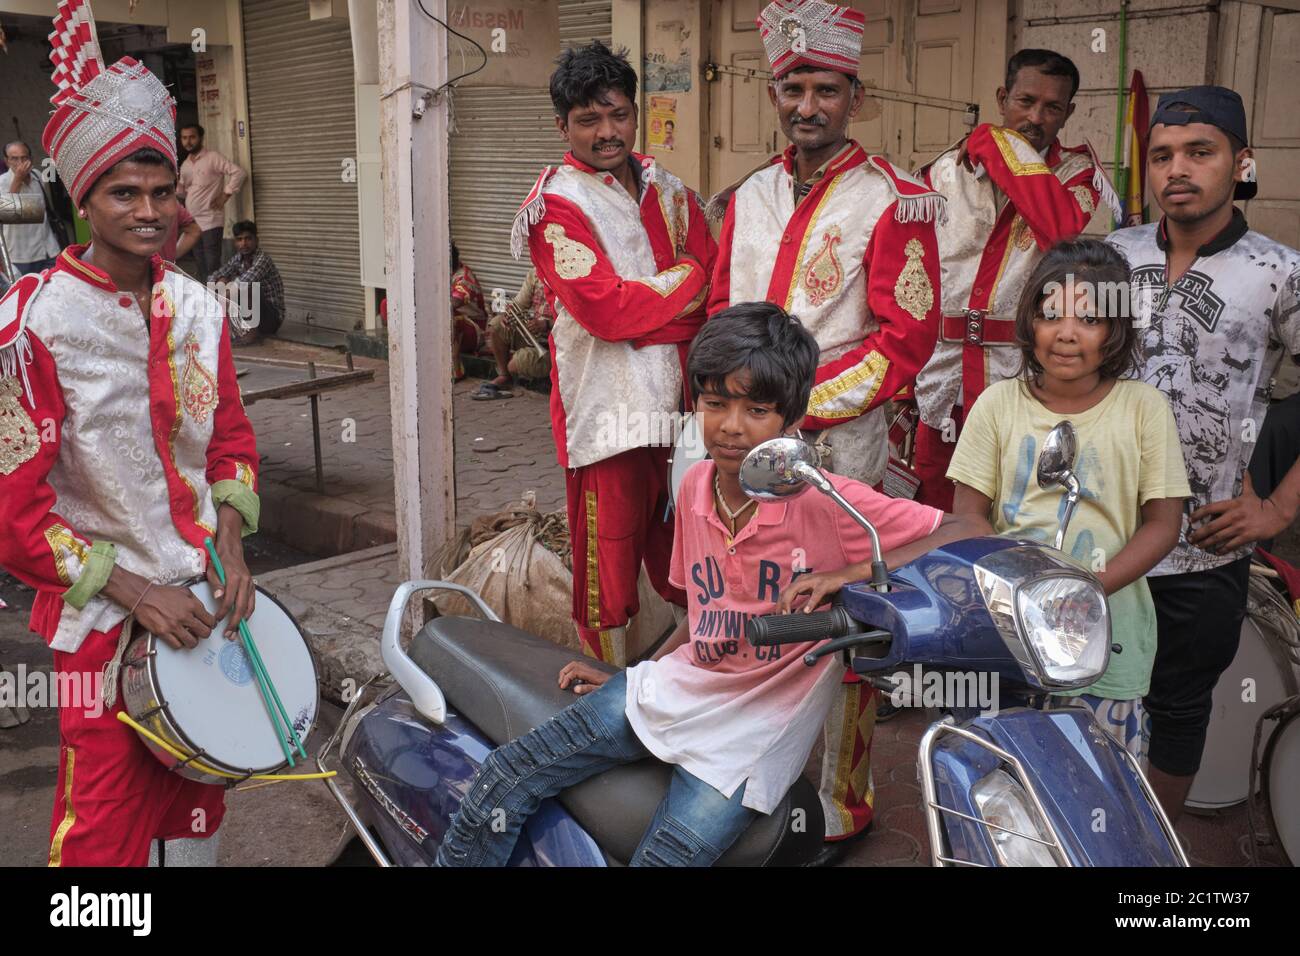 Uniformed Indian wedding band and festival musicians during a break mingling with locals; Mumbai, India Stock Photo